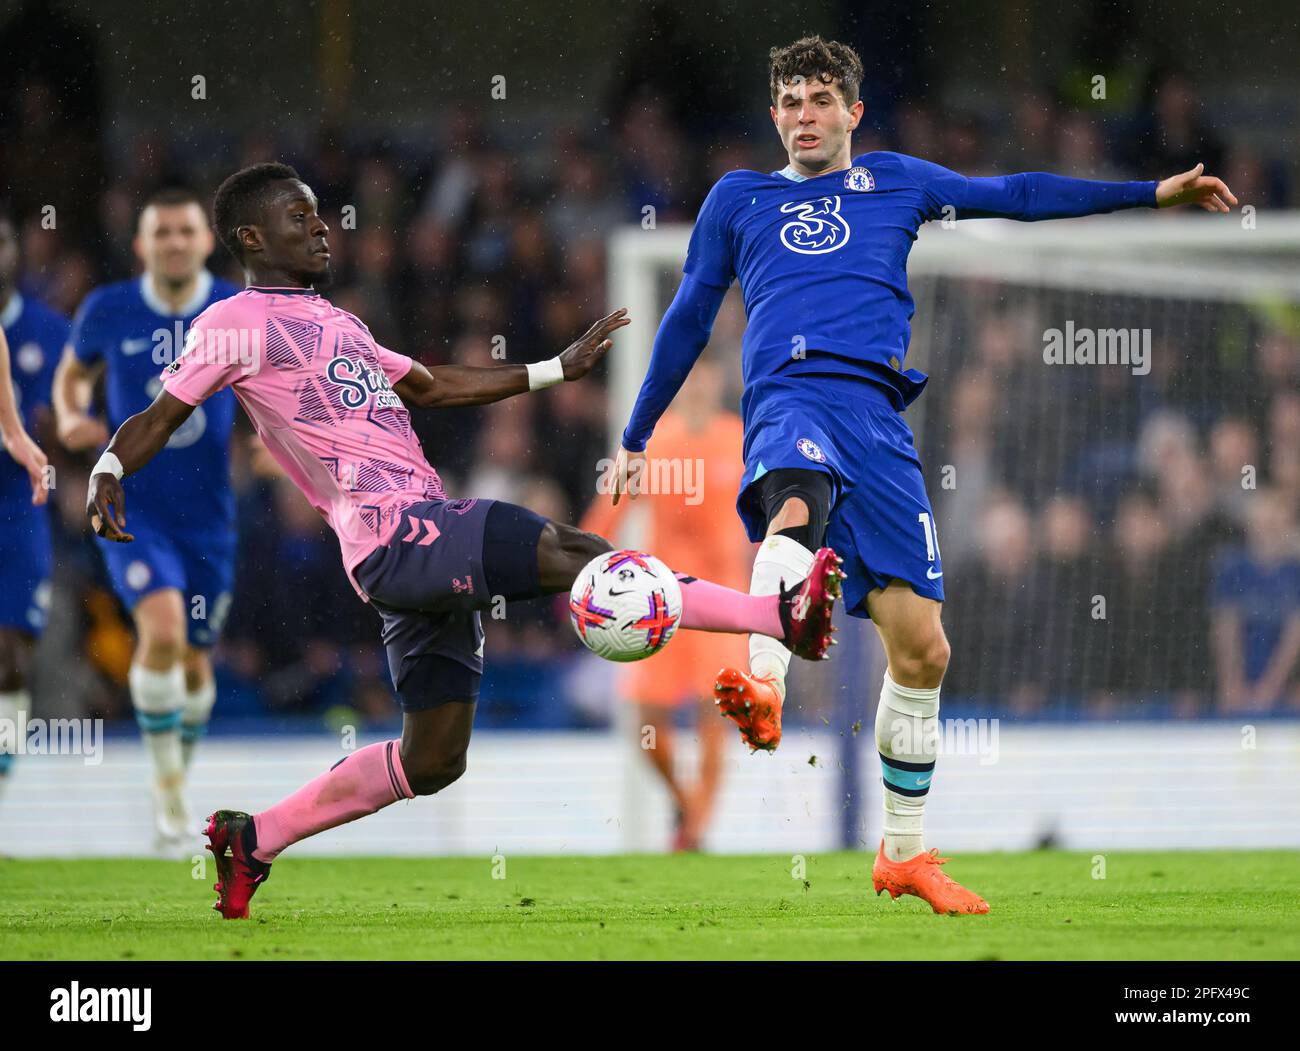 London, UK. 18th Mar, 2023. 18 Mar 2023 - Chelsea v Everton - Premier League - Stamford Bridge Chelsea's Christian Pulisic is tackled by Idrissa Gana Gueye during the Premier League match at Stamford Bridge, London. Picture Credit: Mark Pain/Alamy Live News Stock Photo